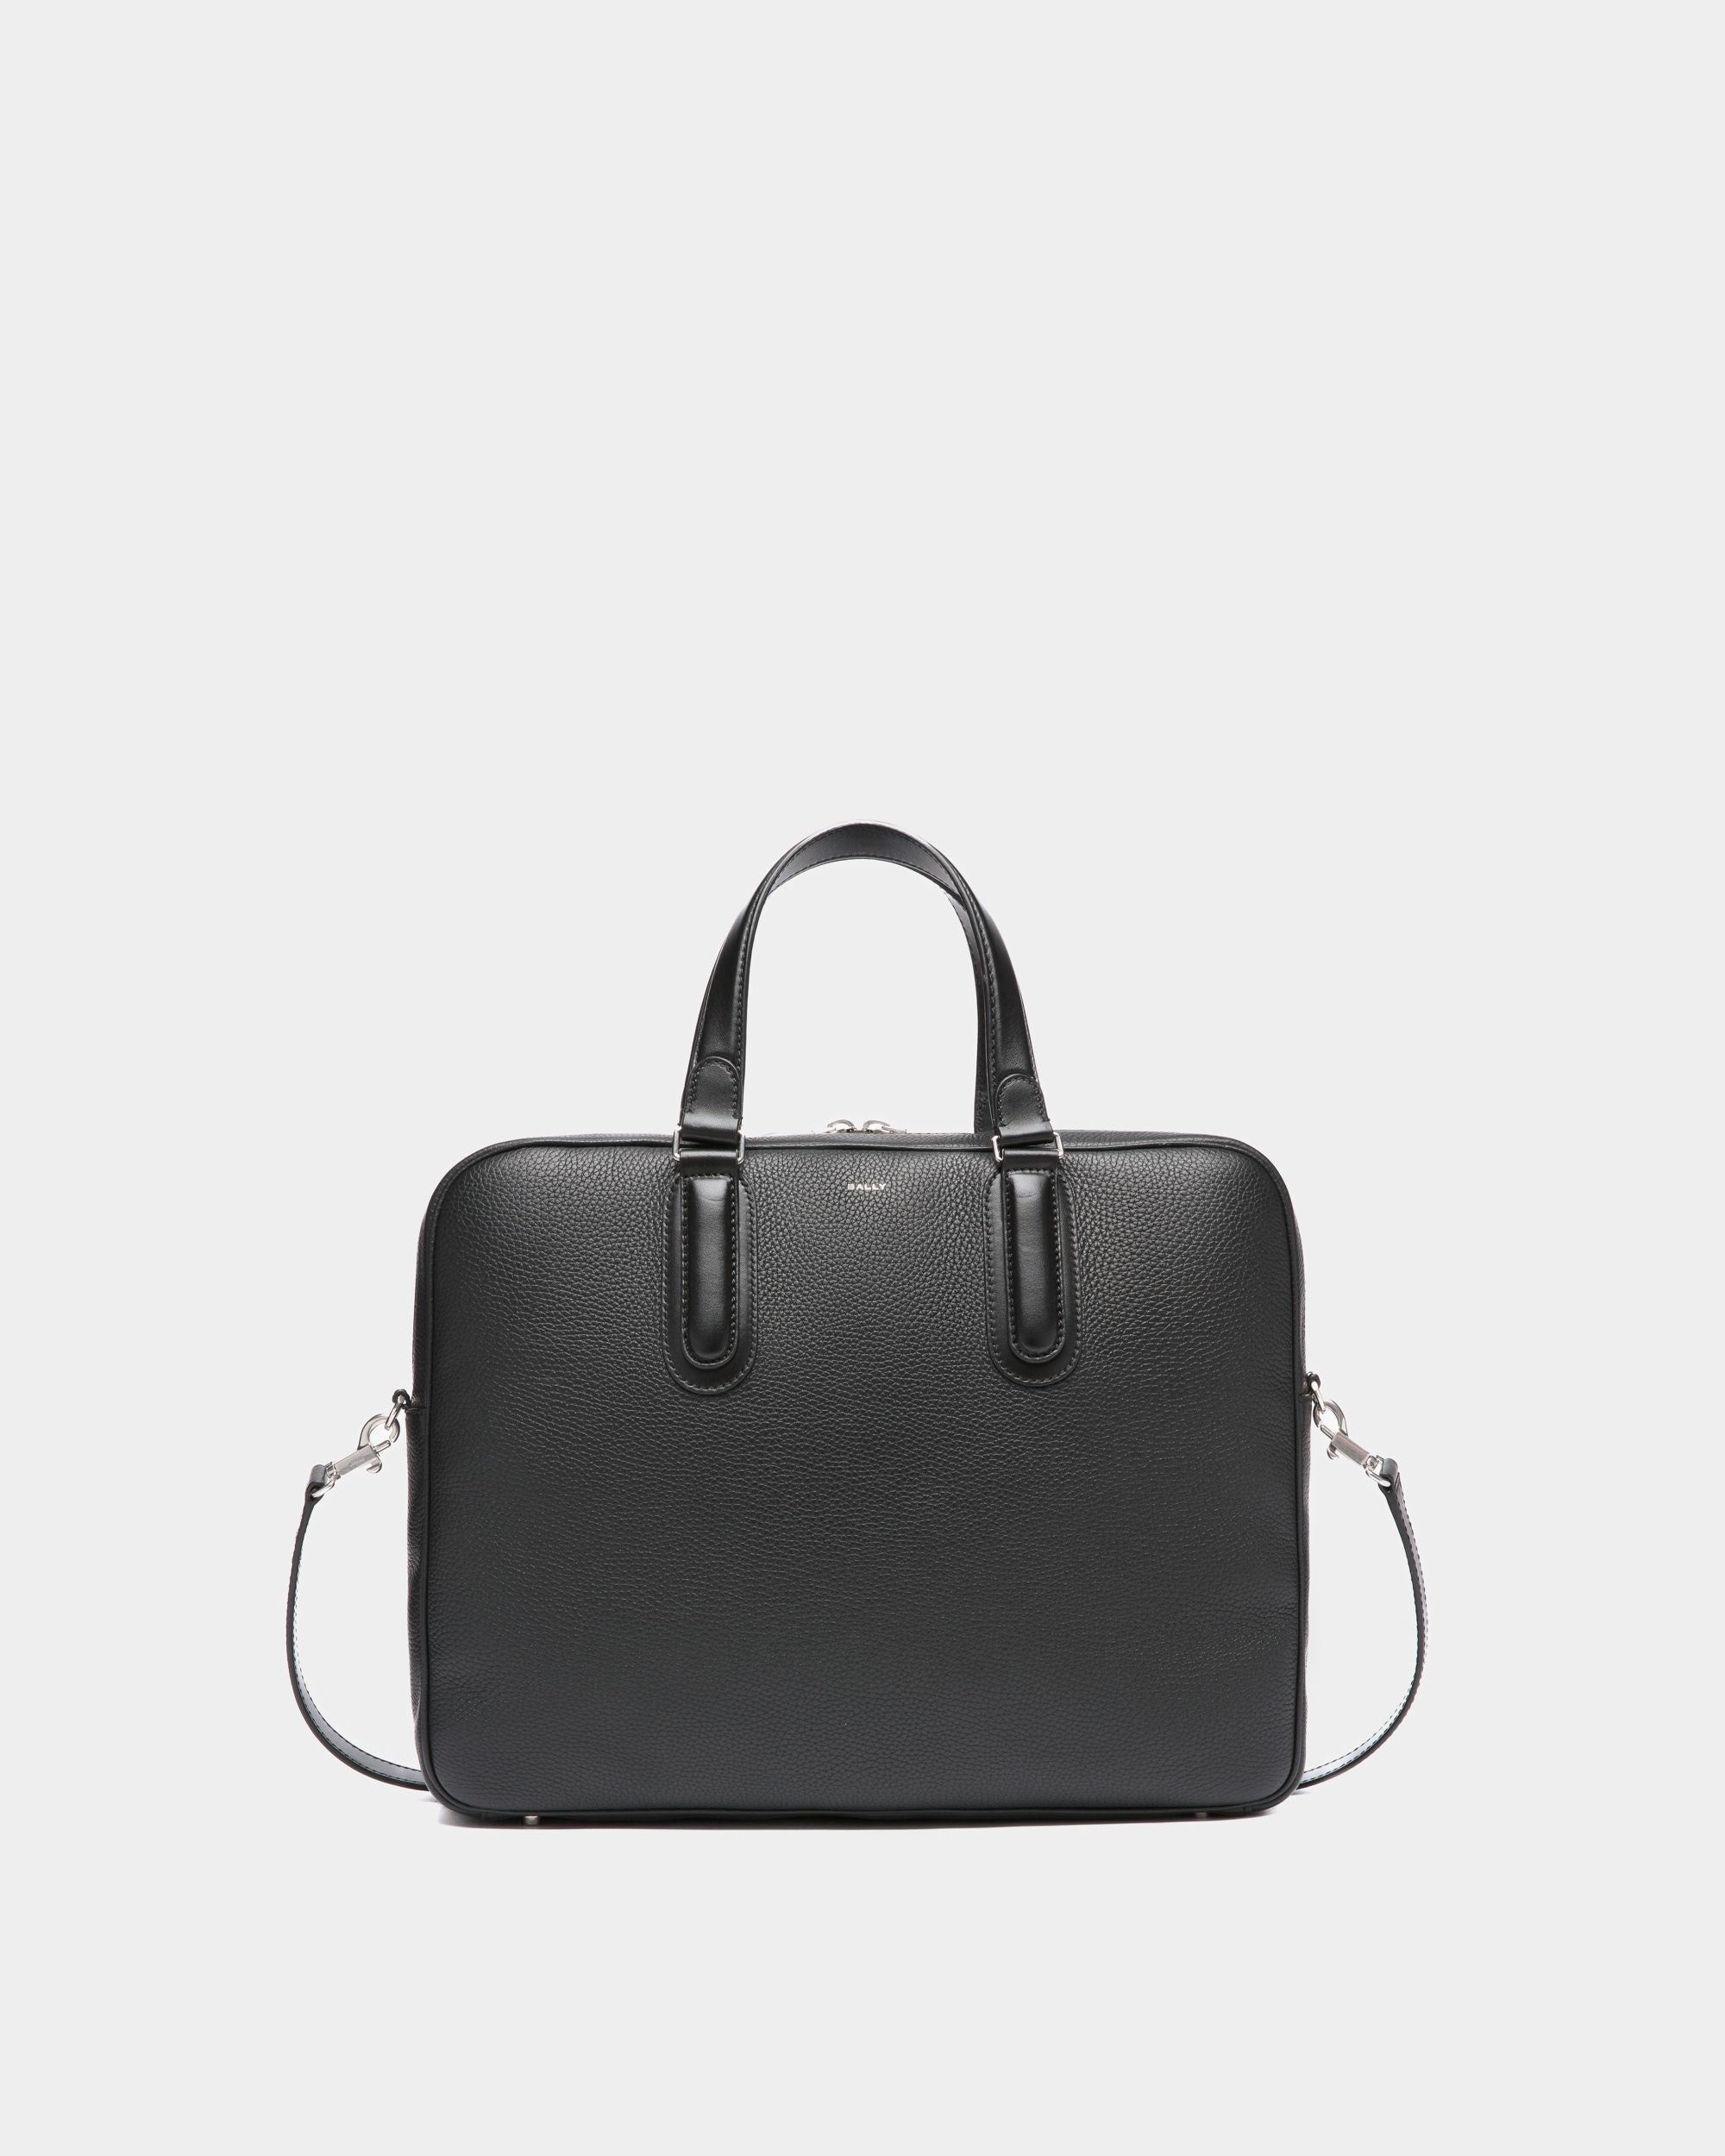 Spin | Men's Briefcase in Black Grained Leather | Bally | Still Life Front